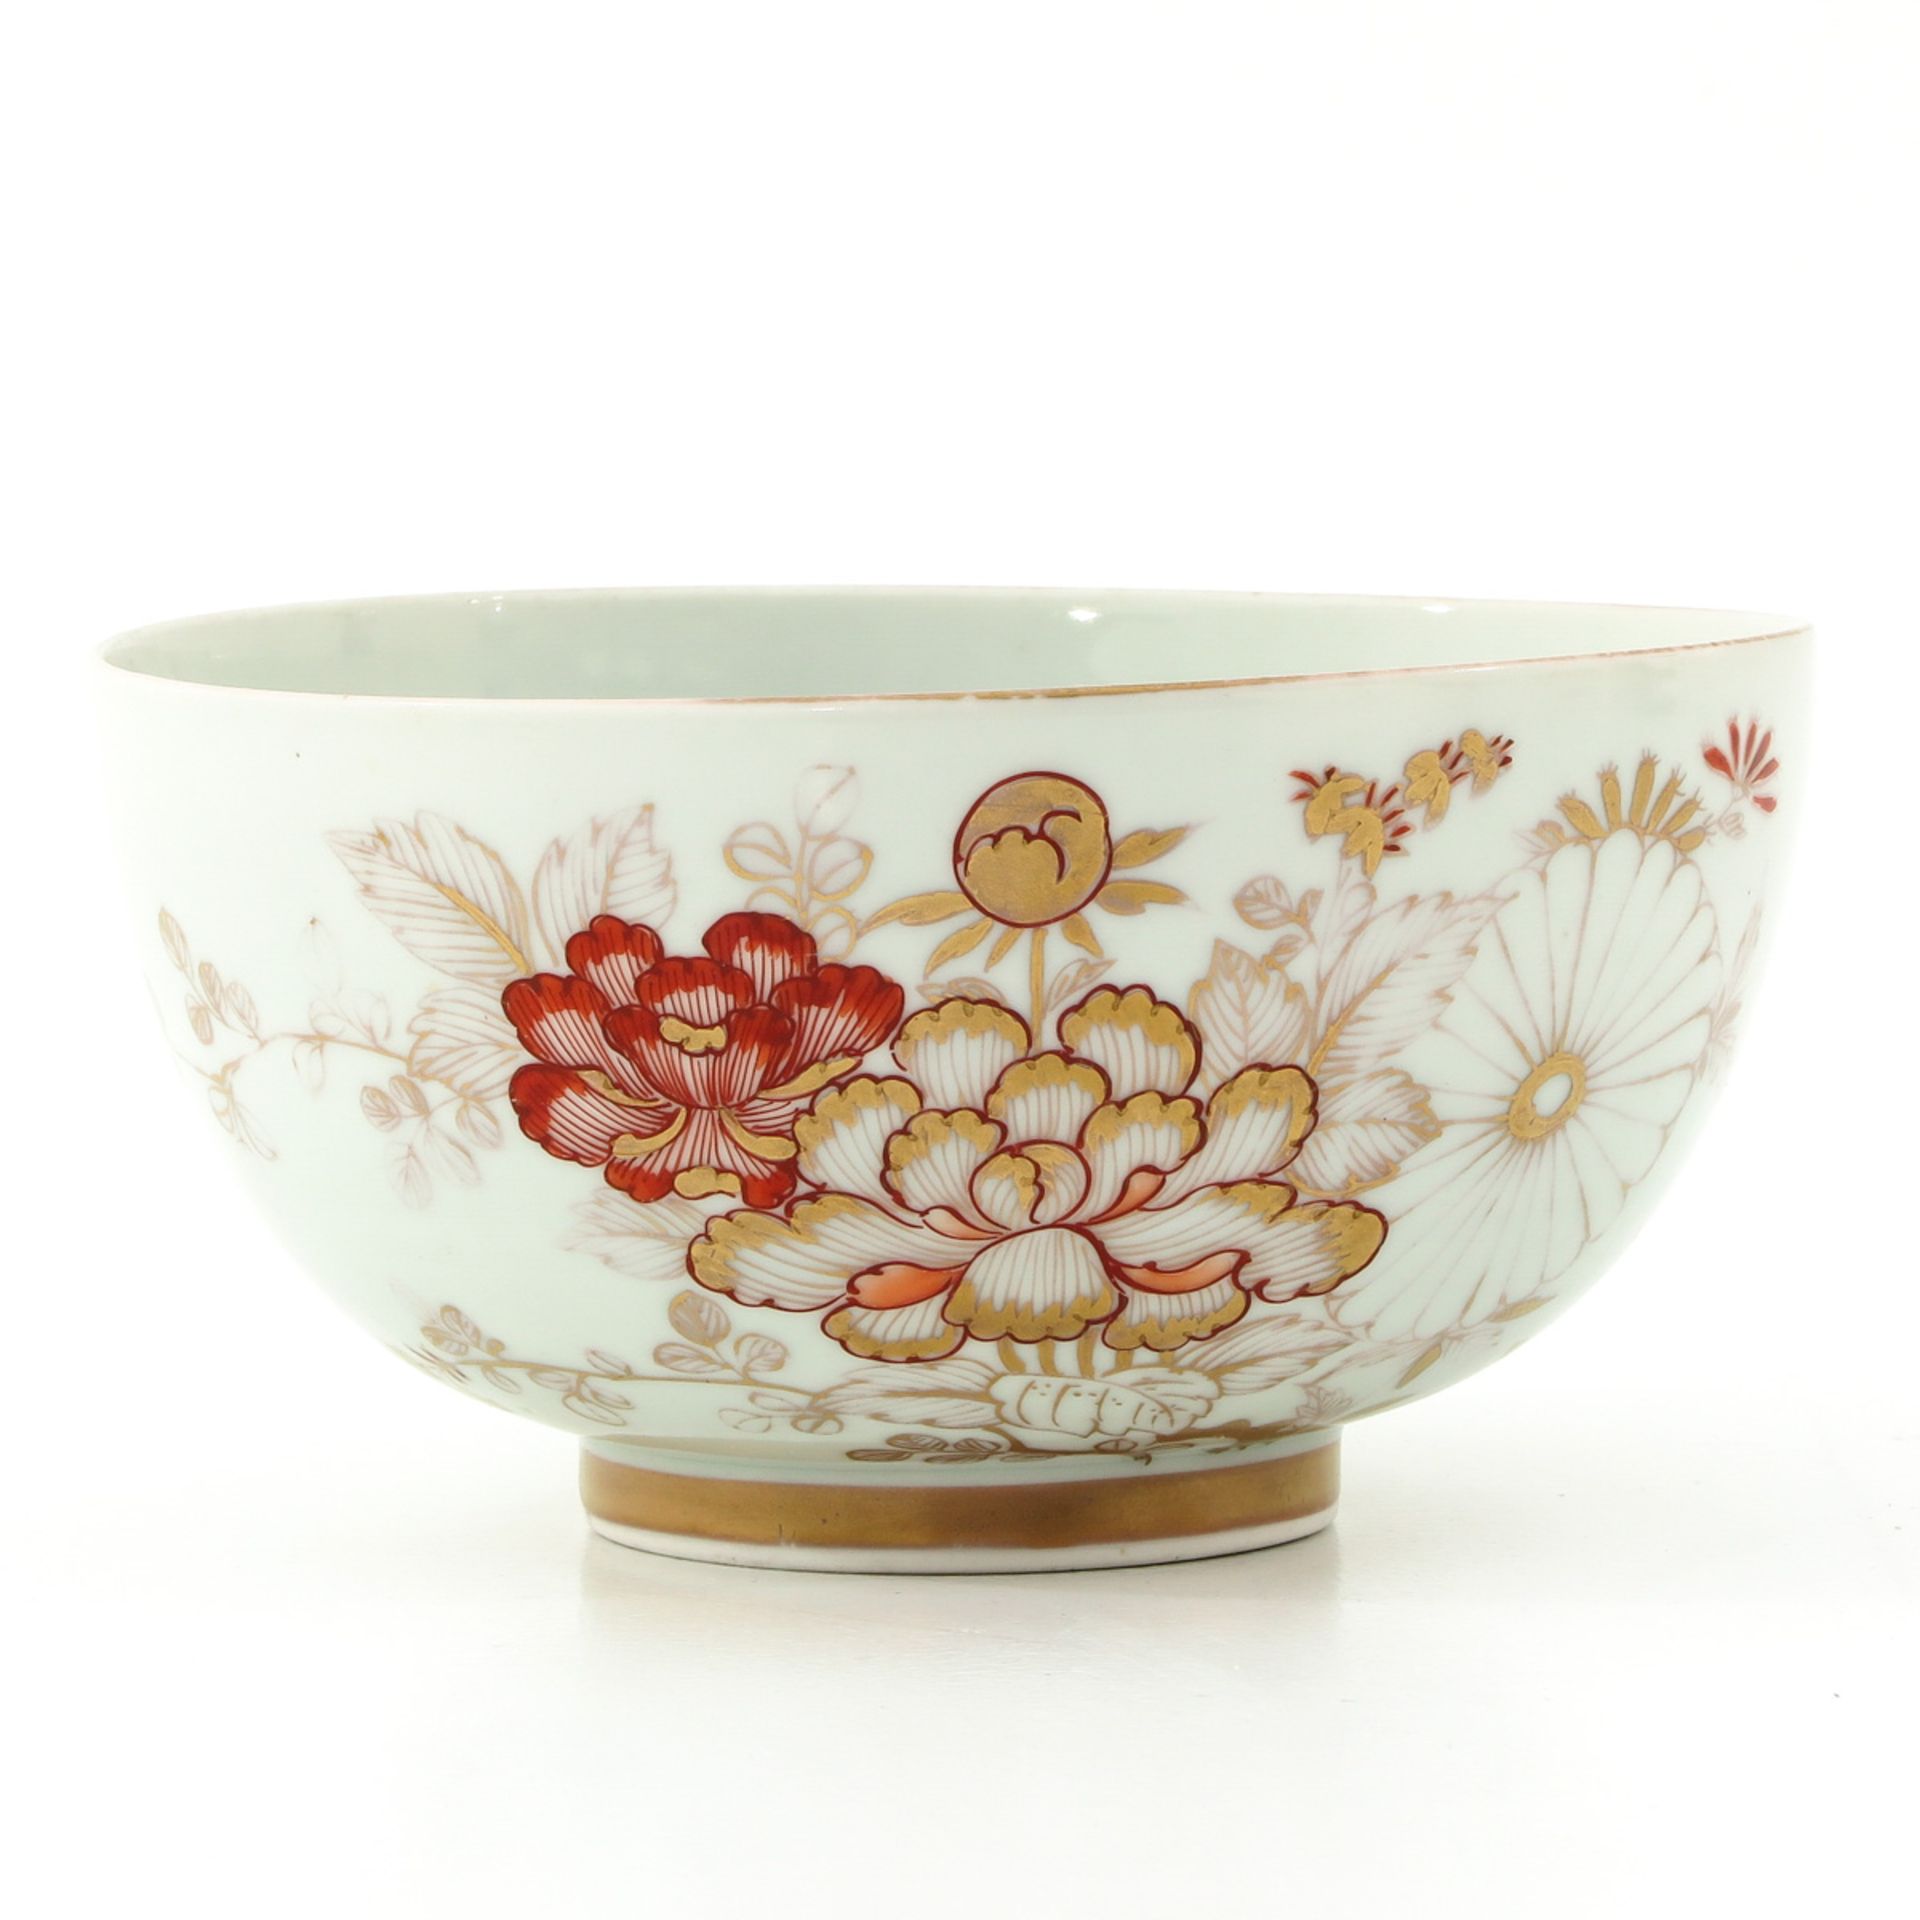 A Milk and Blood Decor Bowl